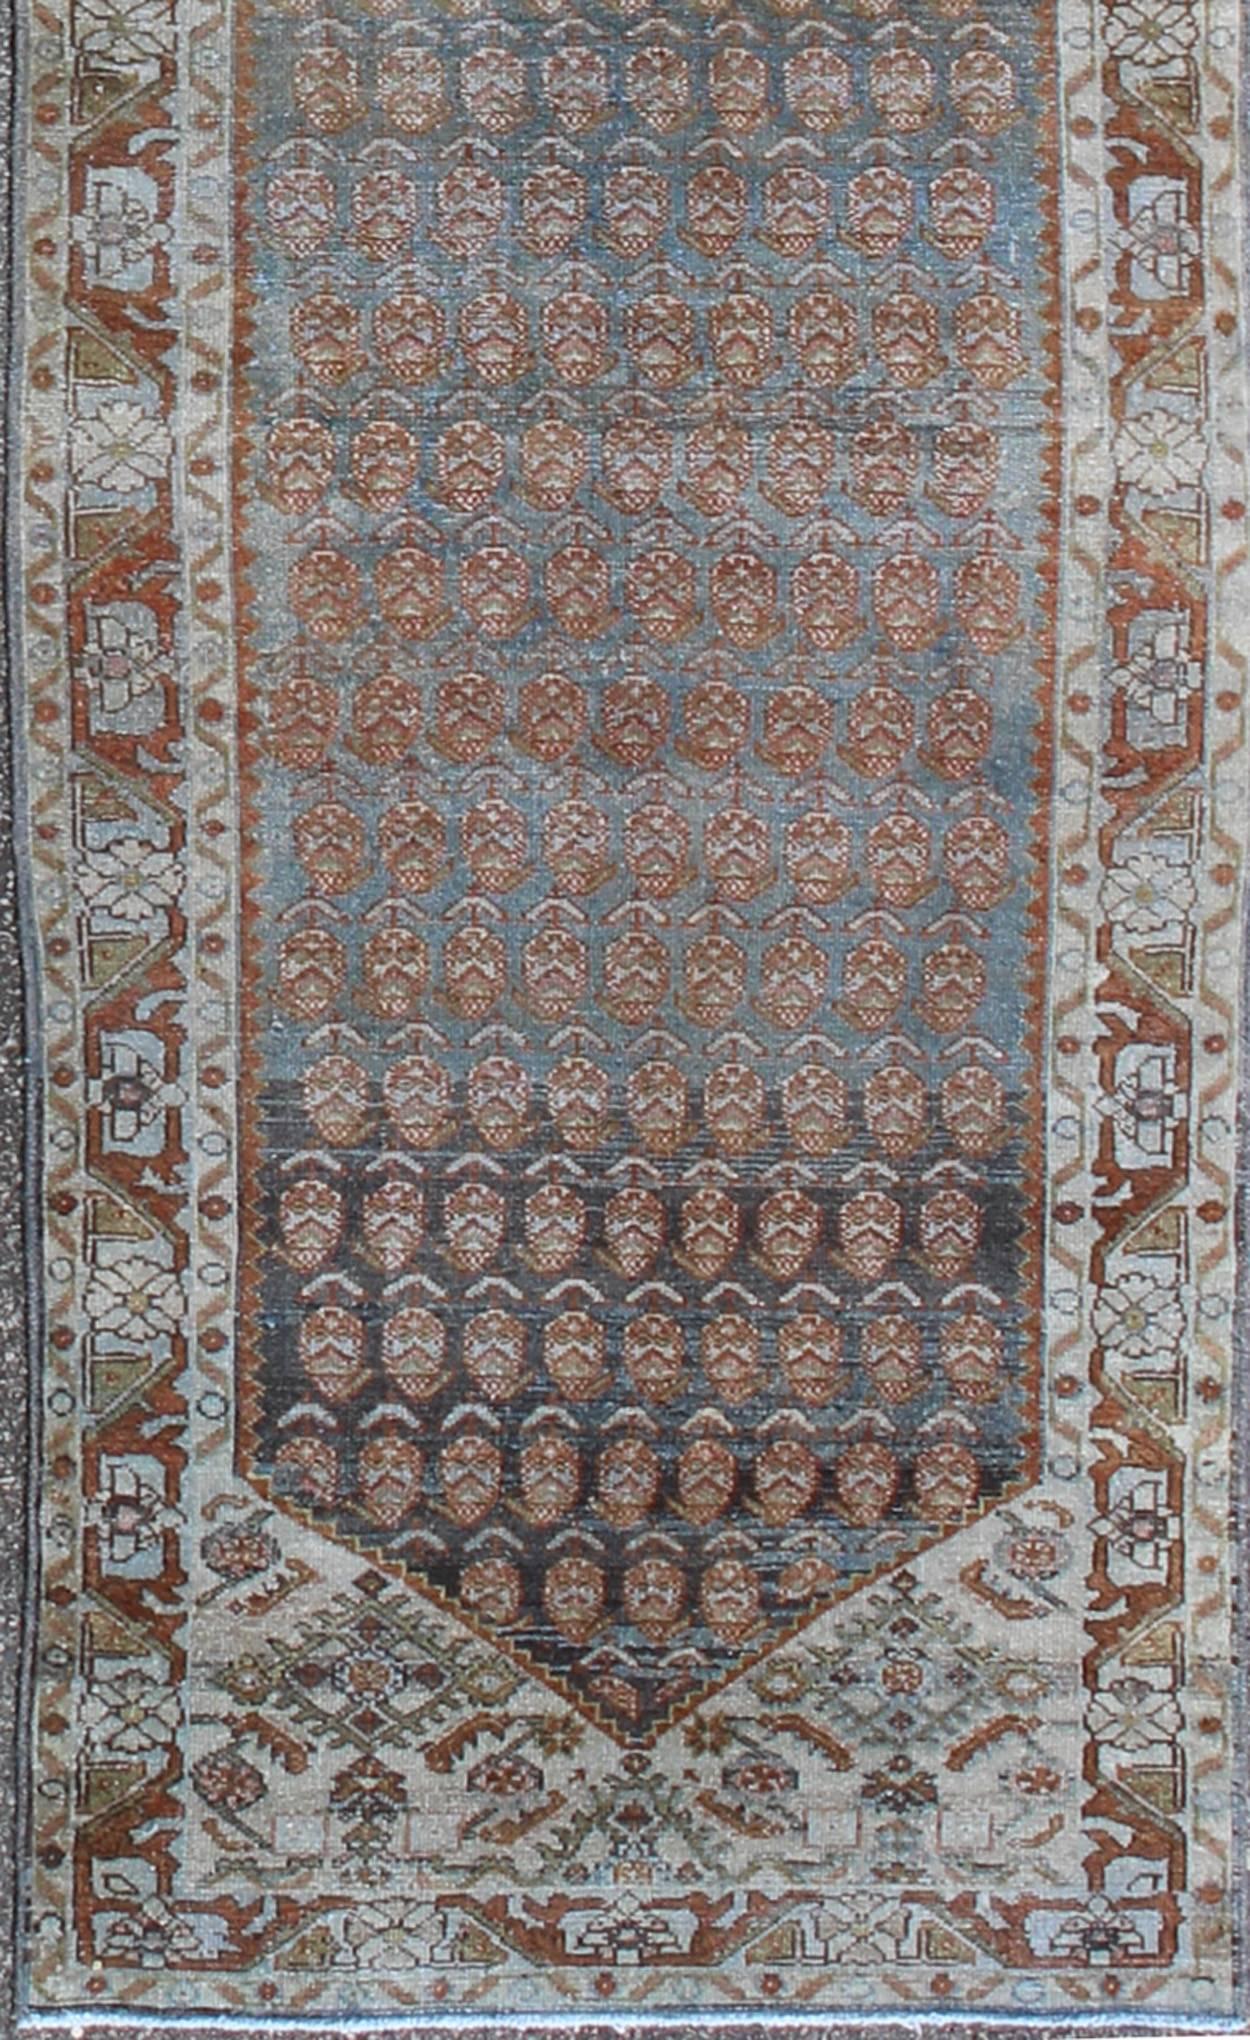 This magnificent antique long Persian Malayer runner, of an impressive size, bears a beautiful, all-over sub-geometric design paired with a delightful palette of various shades of blue, ivory, sea foam green, and rust. The central field is filled